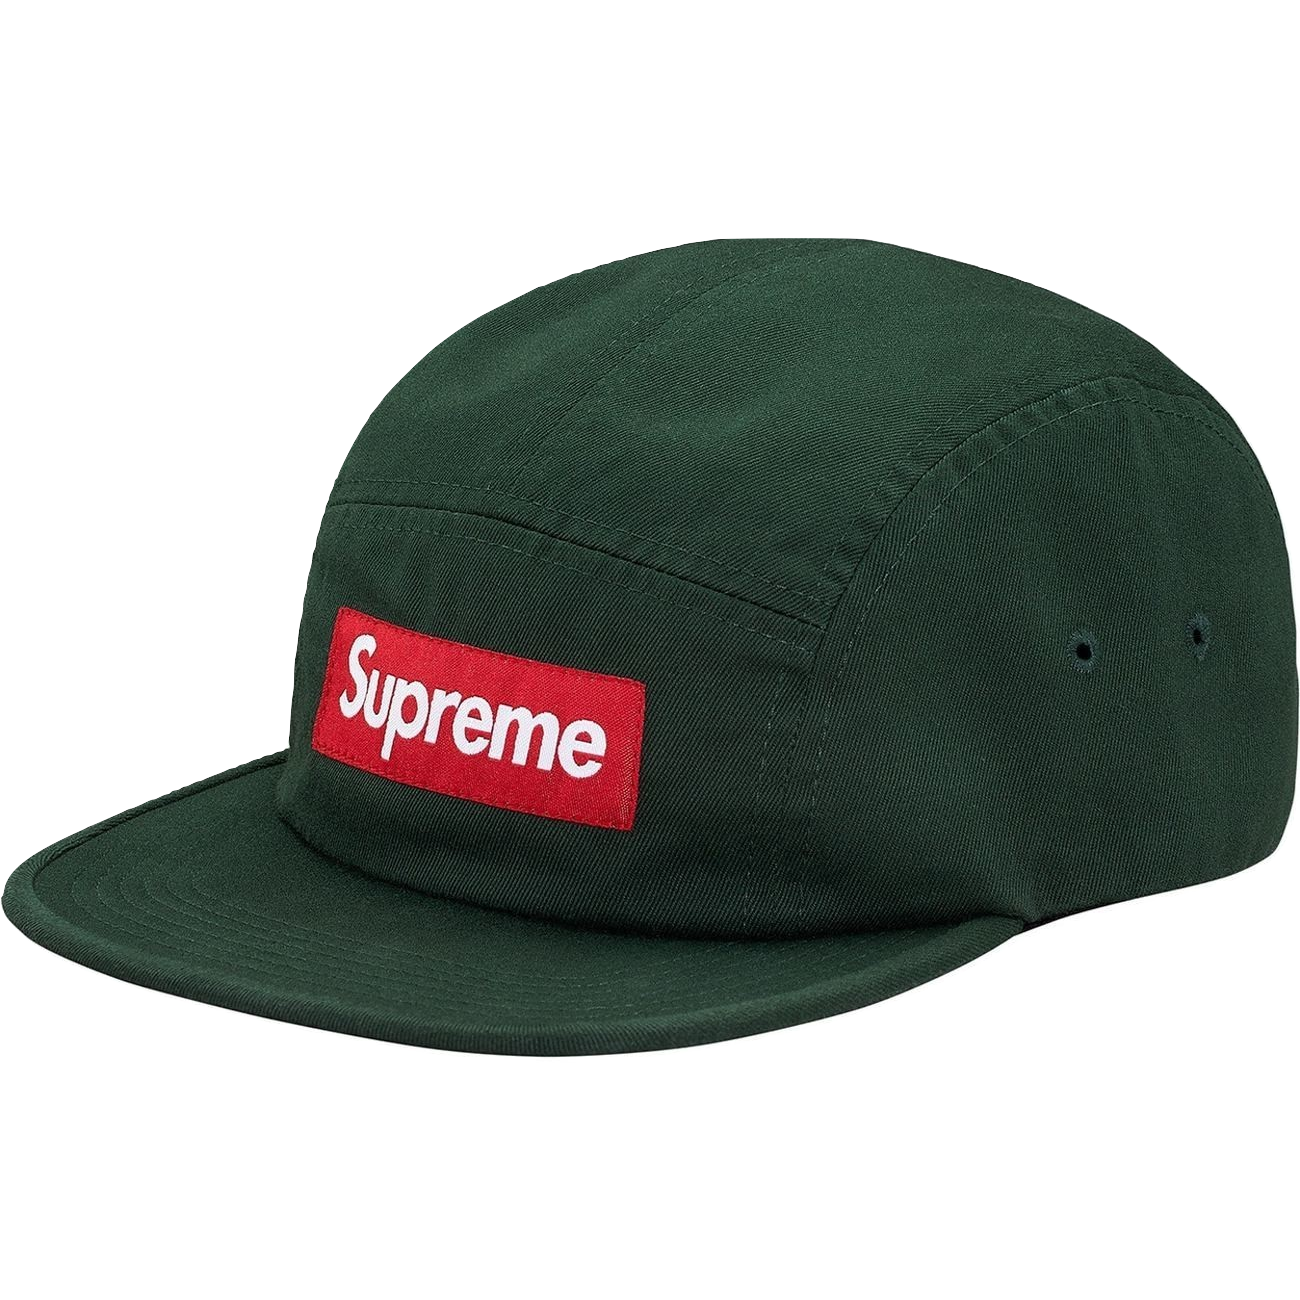 Supreme Washed Chino Twill Camp Cap - Pine Green - Used